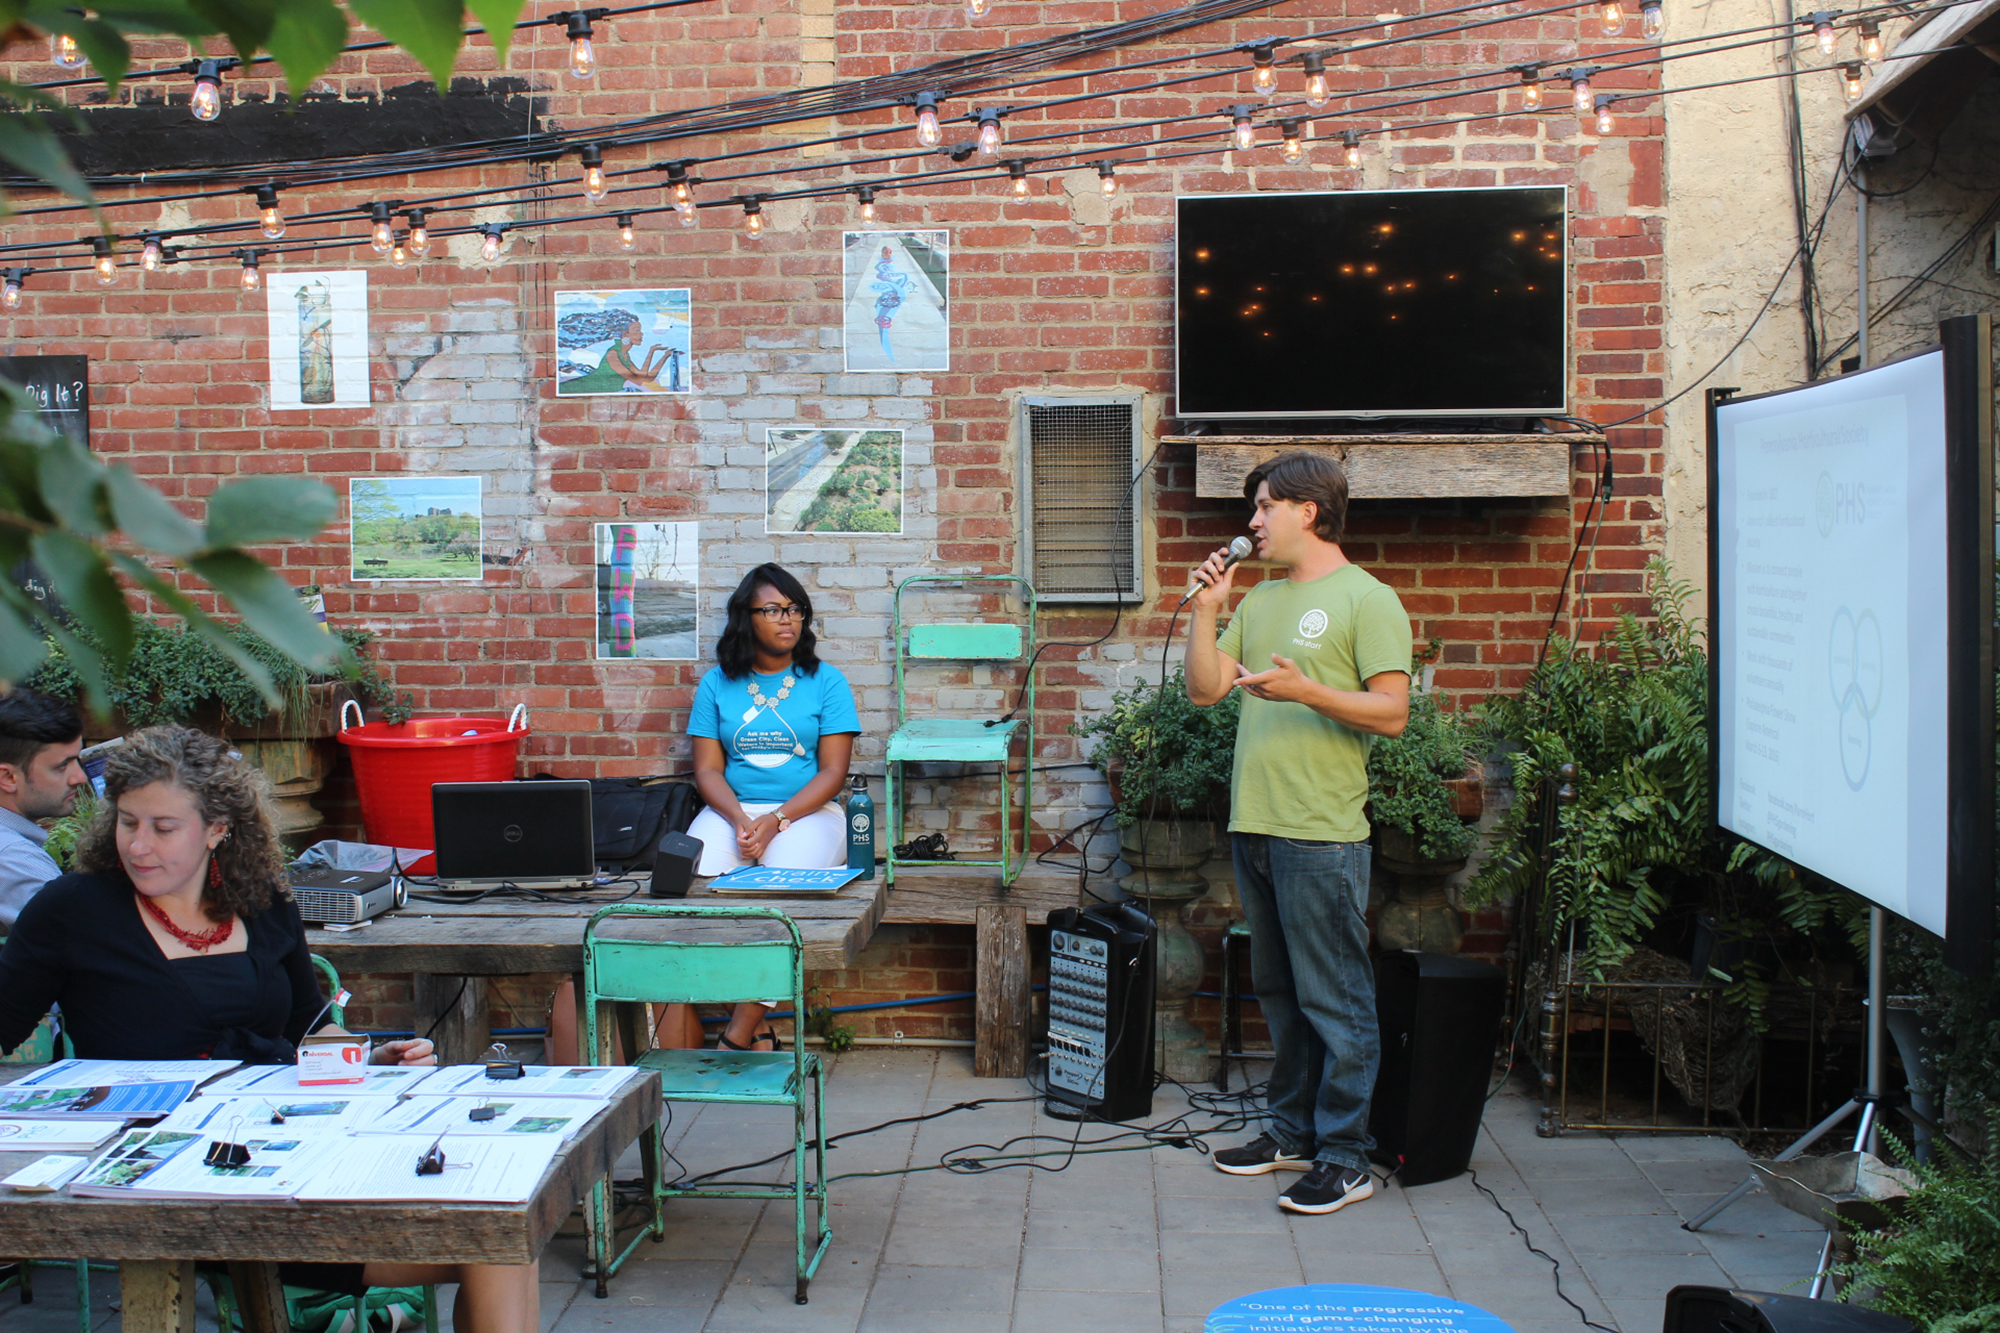 A photo from a past workshop shows a presenter speaking into a microphone, explaining a diagram projected onto a portable screen. Workshop participants are seated at large wooden tables in a brick-walled courtyard with strands of lights strung back and forth overhead and lots of potted plants around the edges.